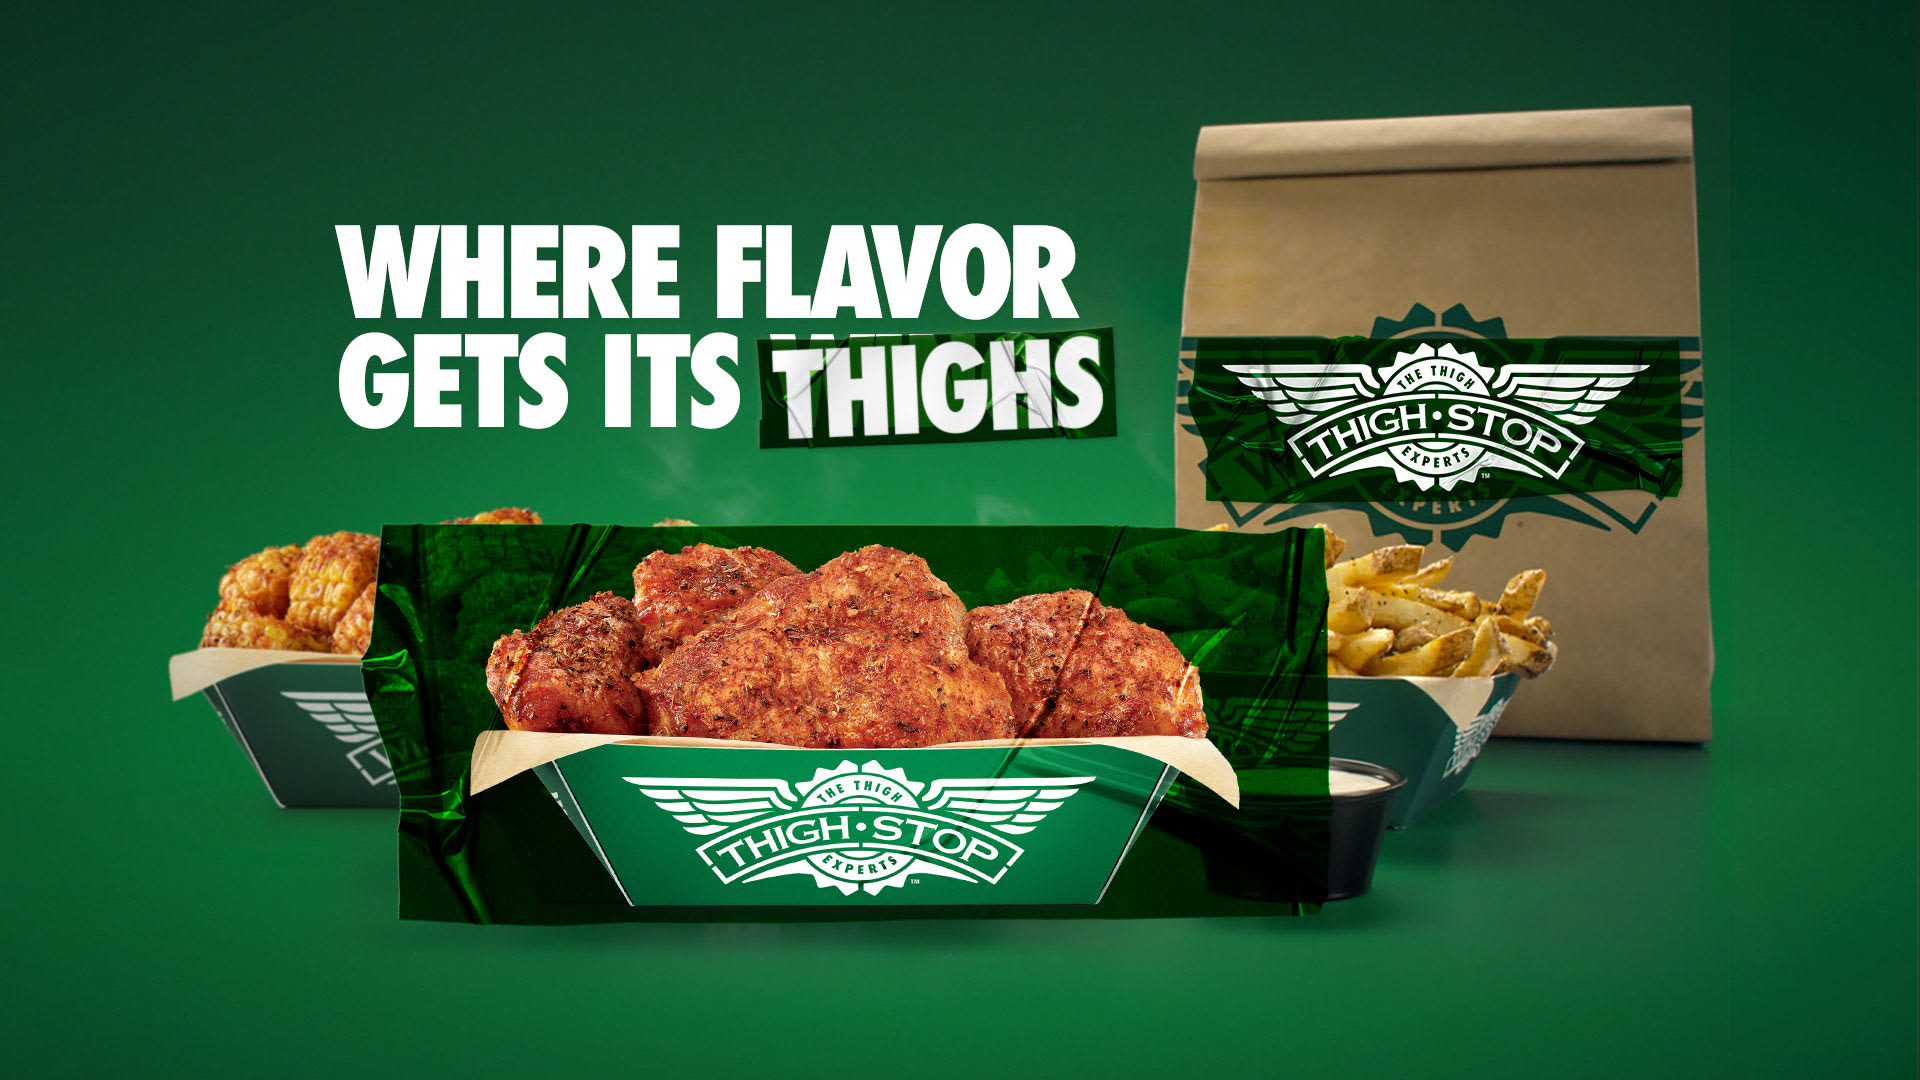 Thighstop launches today as a virtual brand, focusing on chicken thighs.